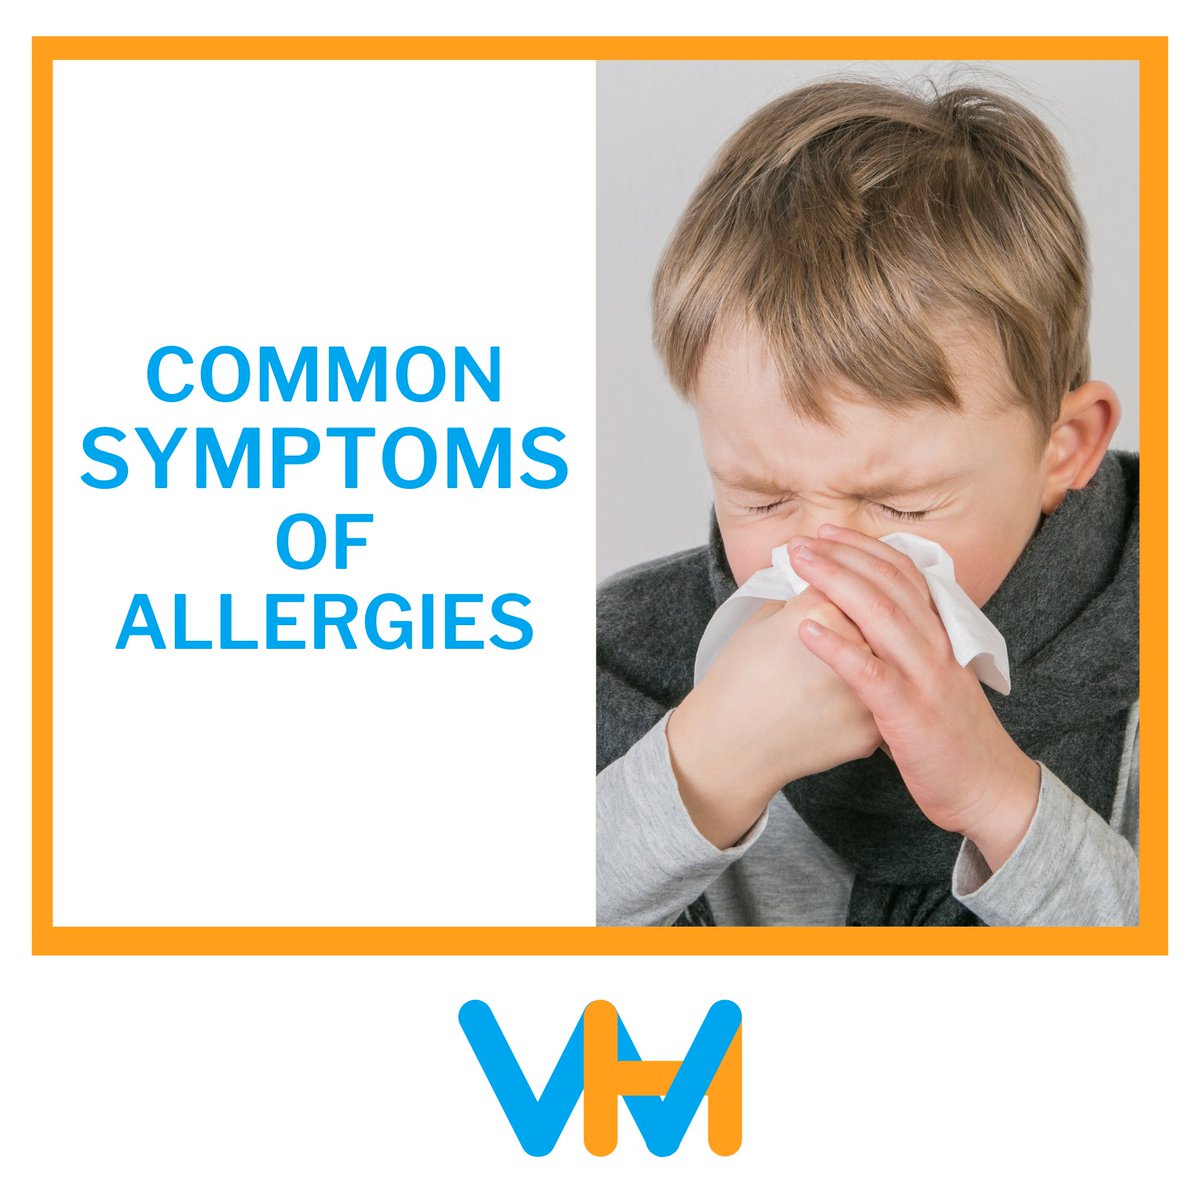 Common Symptoms of Allergies

• Sneezing
• Runny or Stuffy Nose
• Itchy or Watery Eyes
• Coughing
• Wheezing or Difficulty Breathing
• Skin Rash or Hives
• Swelling of the Face, Lips, Tongue, or Throat
• Nausea, Vomiting, or Diarrhea

#health #doctor #usa #nyc #brooklynny